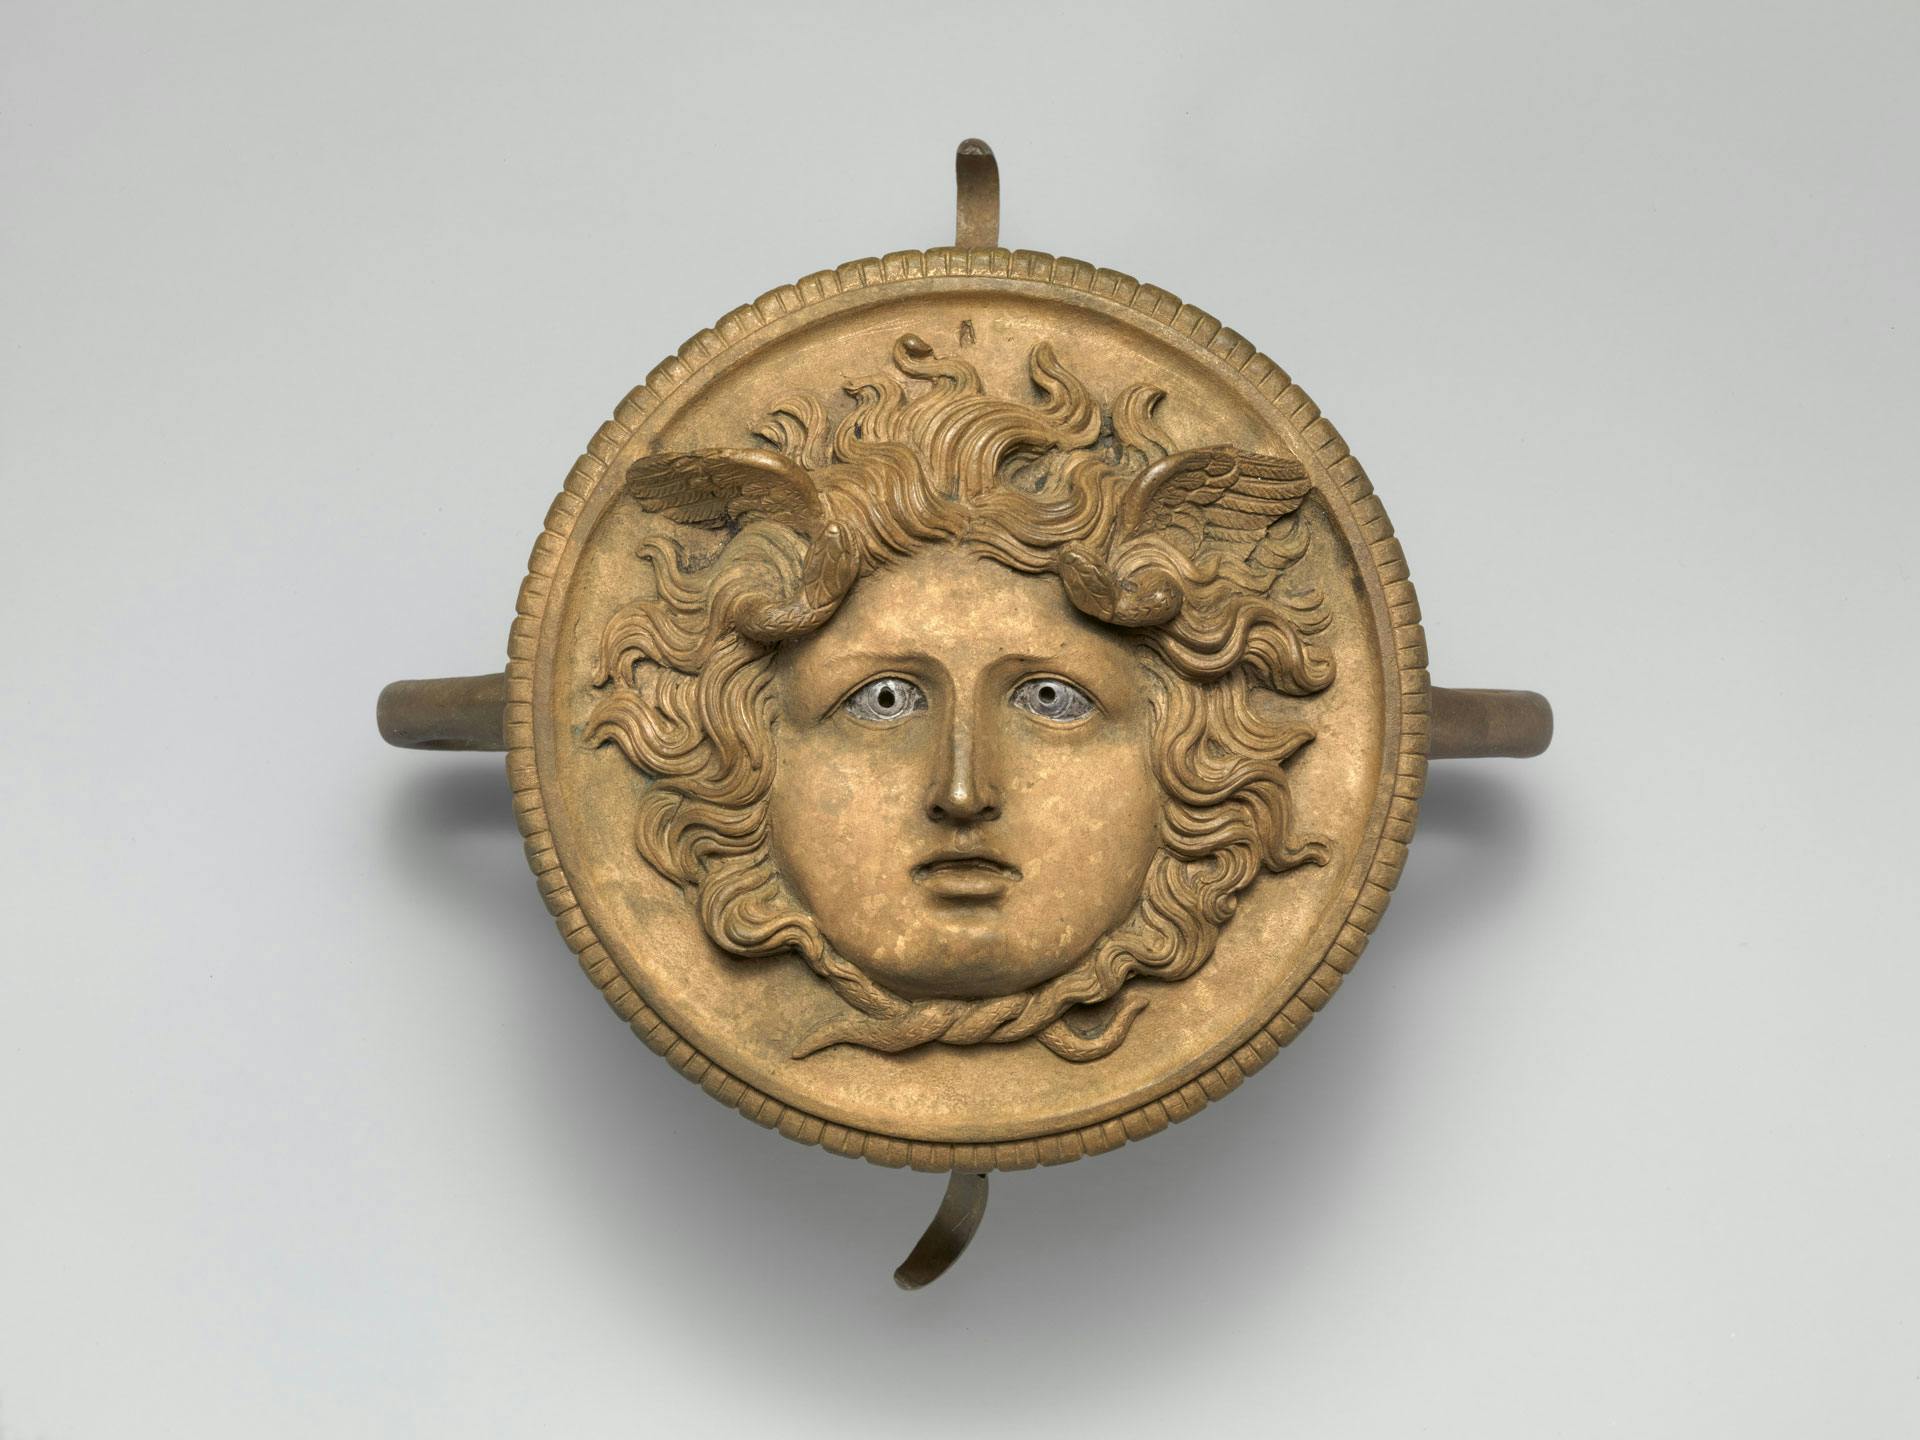 a round bronze ornament with a face